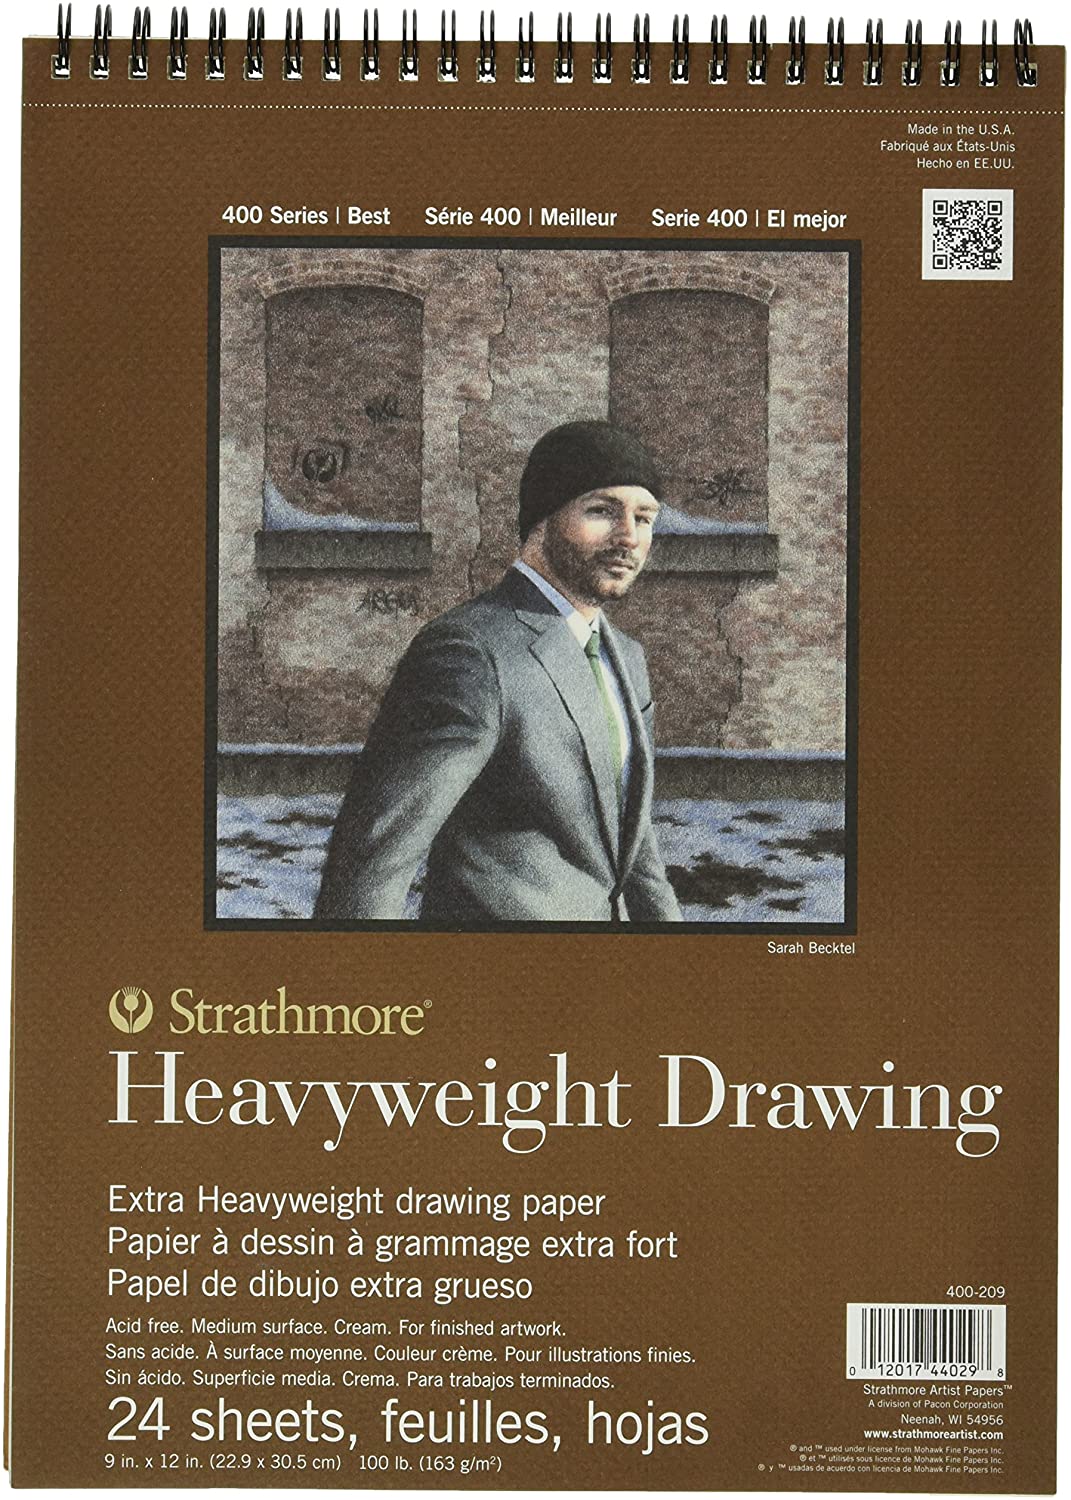 Canson XL Drawing Pad 18x24